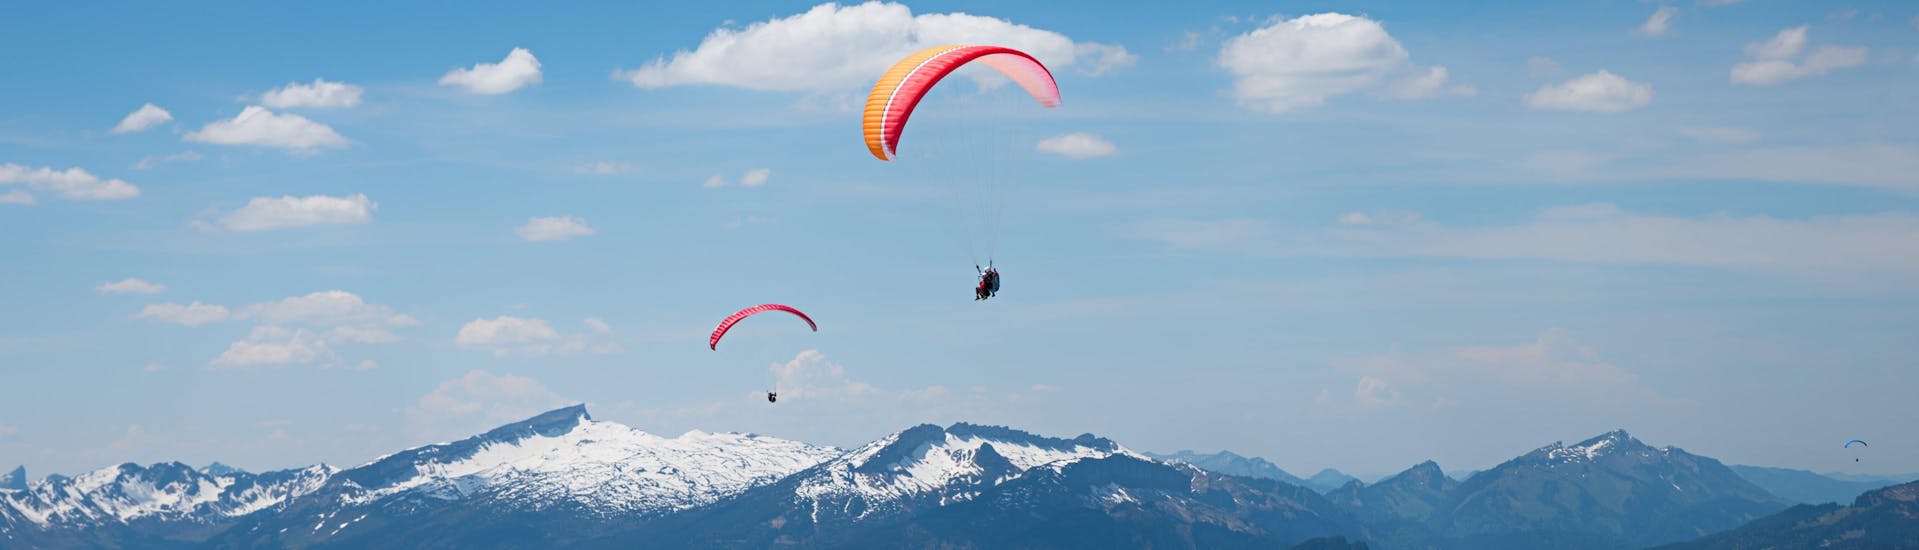 A tandem master and his passenger are sailing through cloudy skies while paragliding in Allgäu.